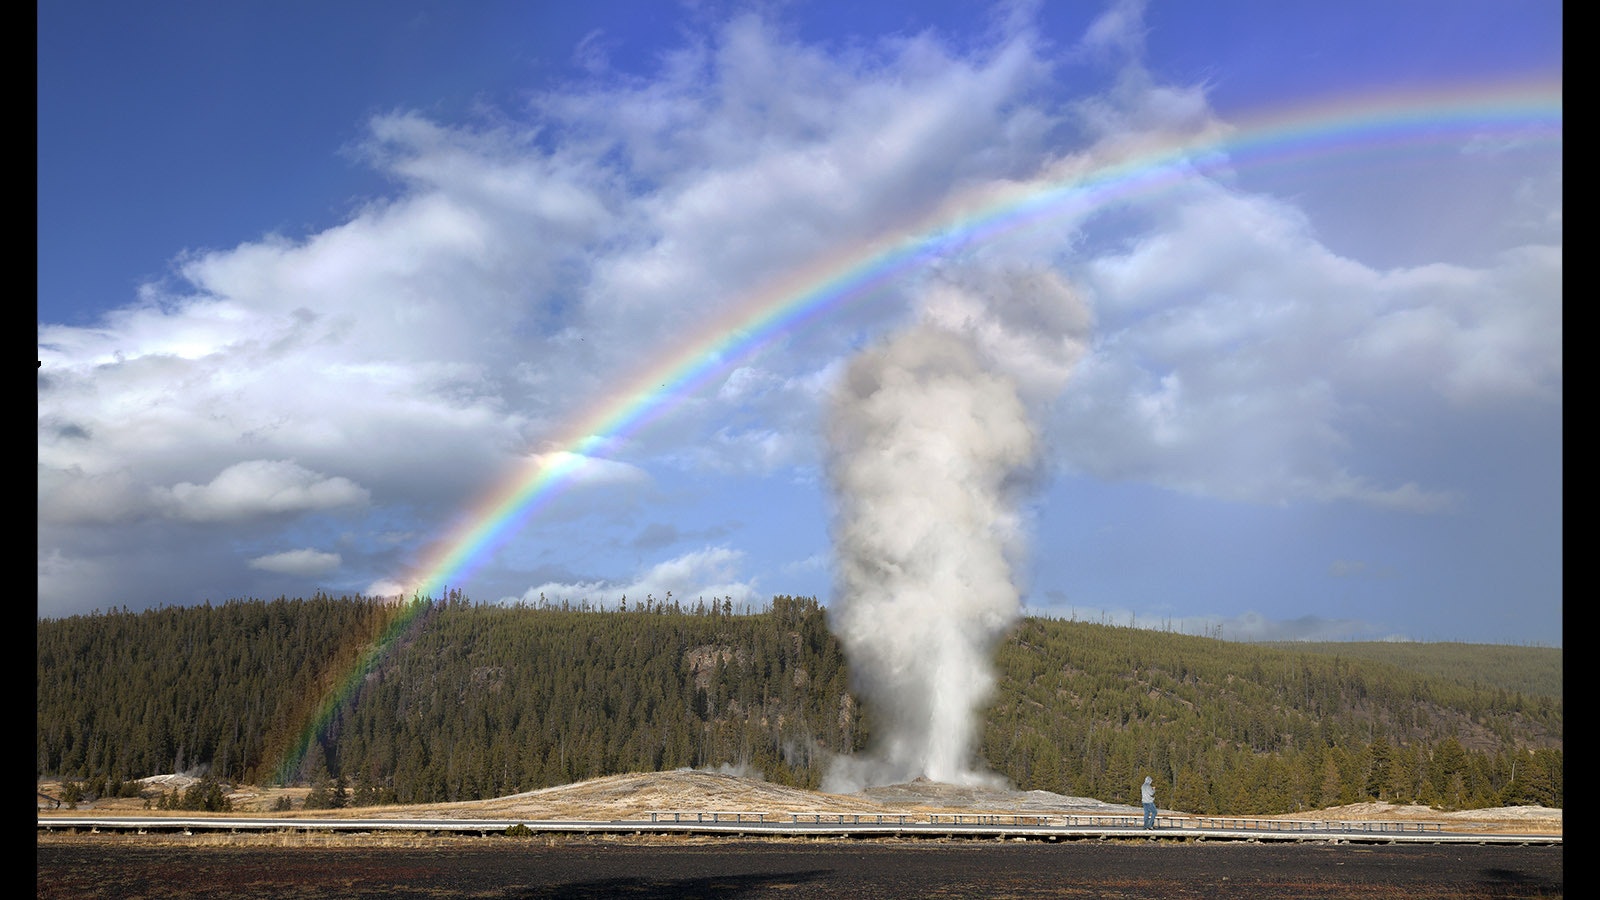 Old Faithful with a rainbow. While the most popular geyser in Yellowstone National Park, there are plenty of others work straying a little off the beaten path to see.